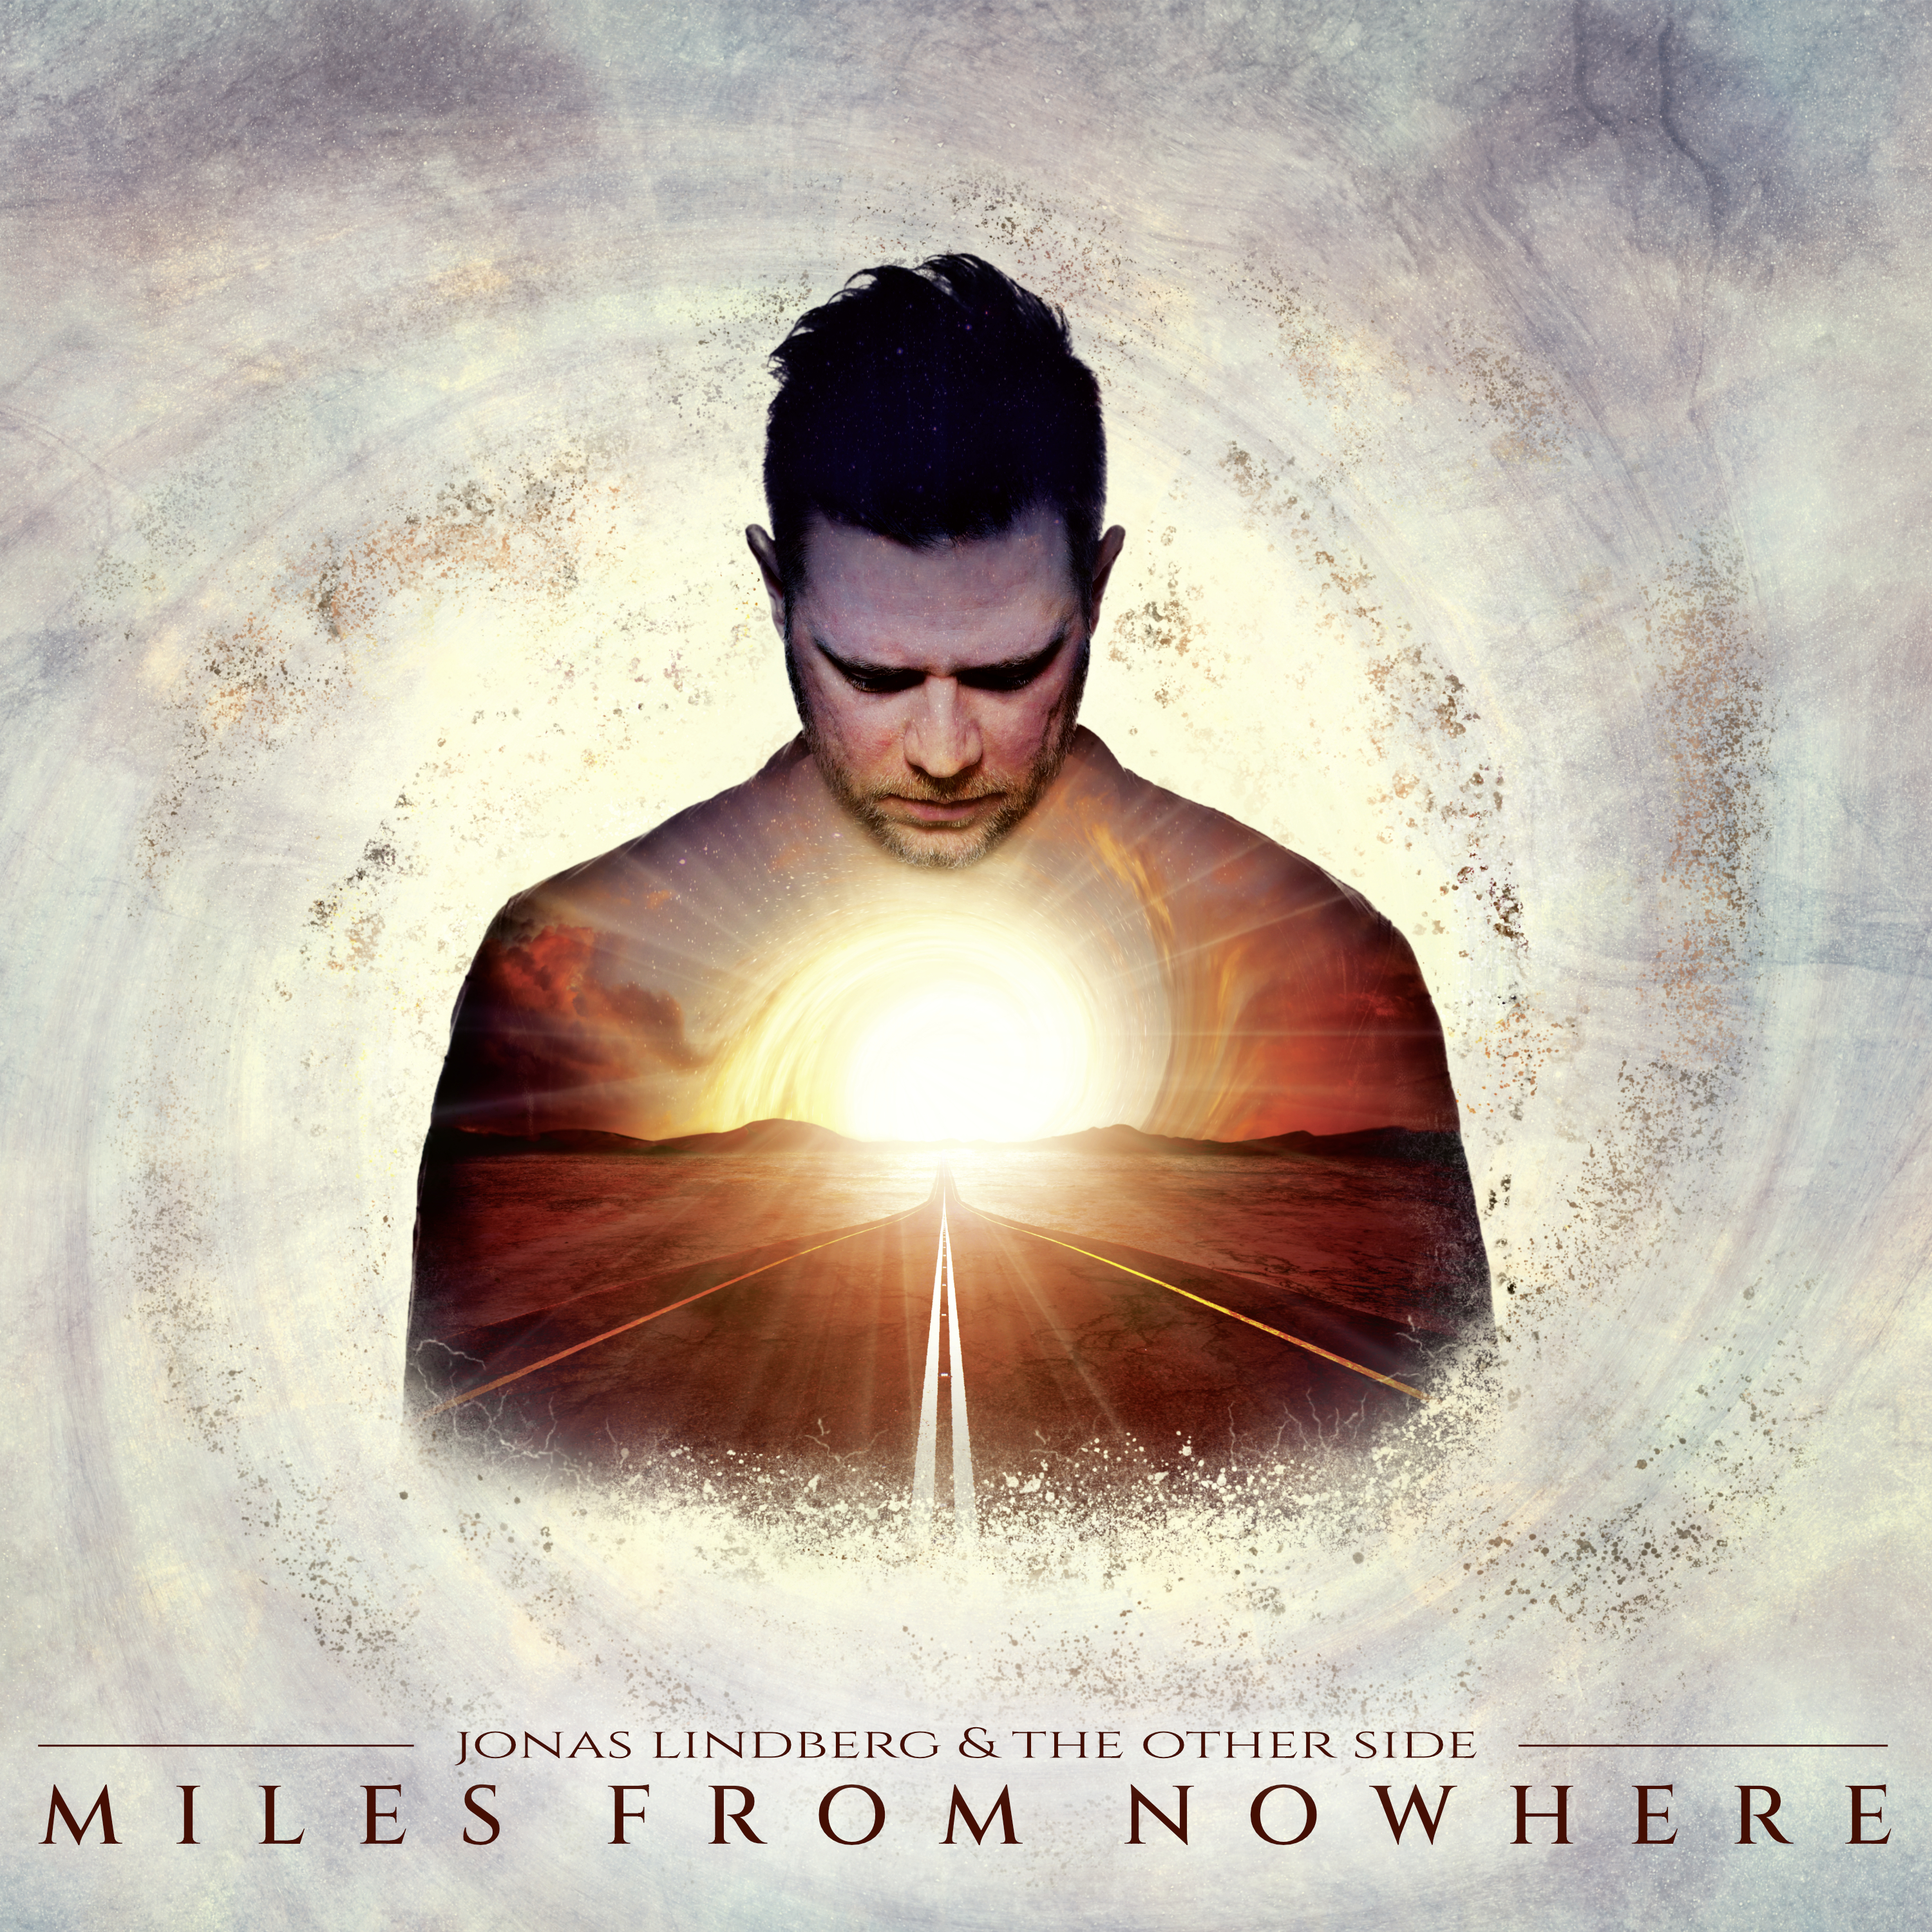 cover of the album cover of the album Miles From Nowhere by Jonas Lindberg and the Other Side